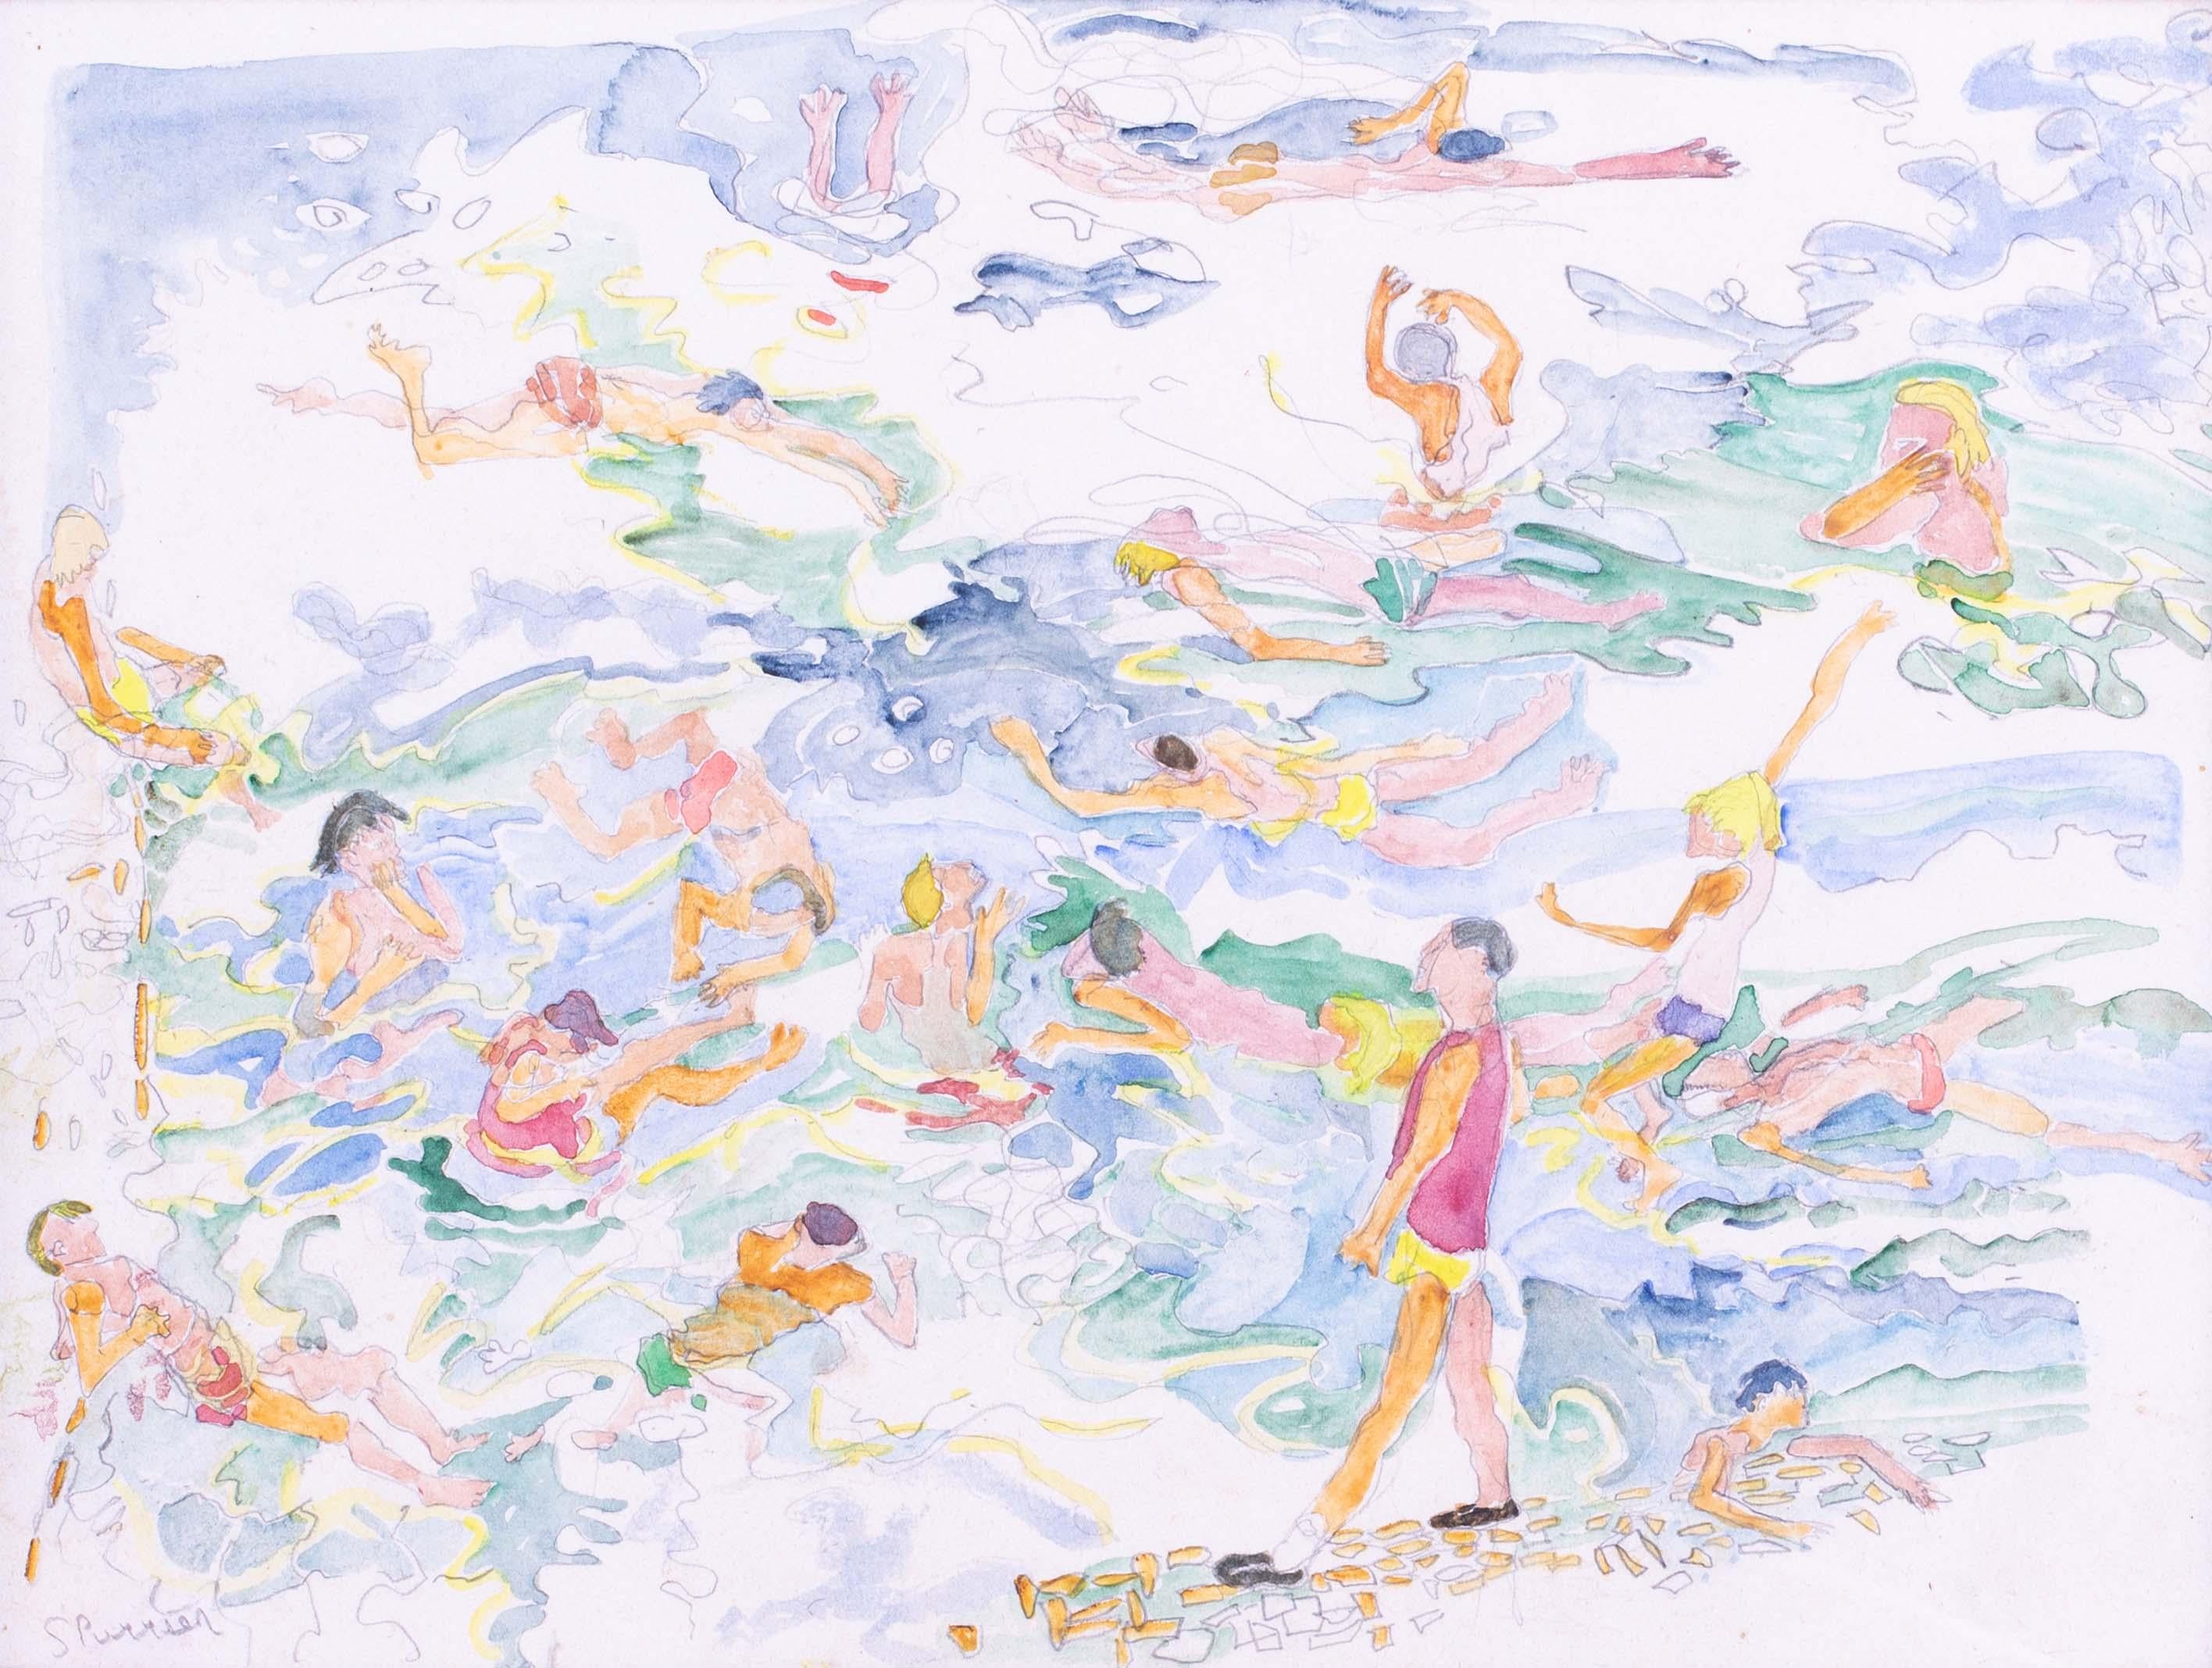 British 20th Century watercolour drawing of figures having fun at the lido - Art by Steven Spurrier RA